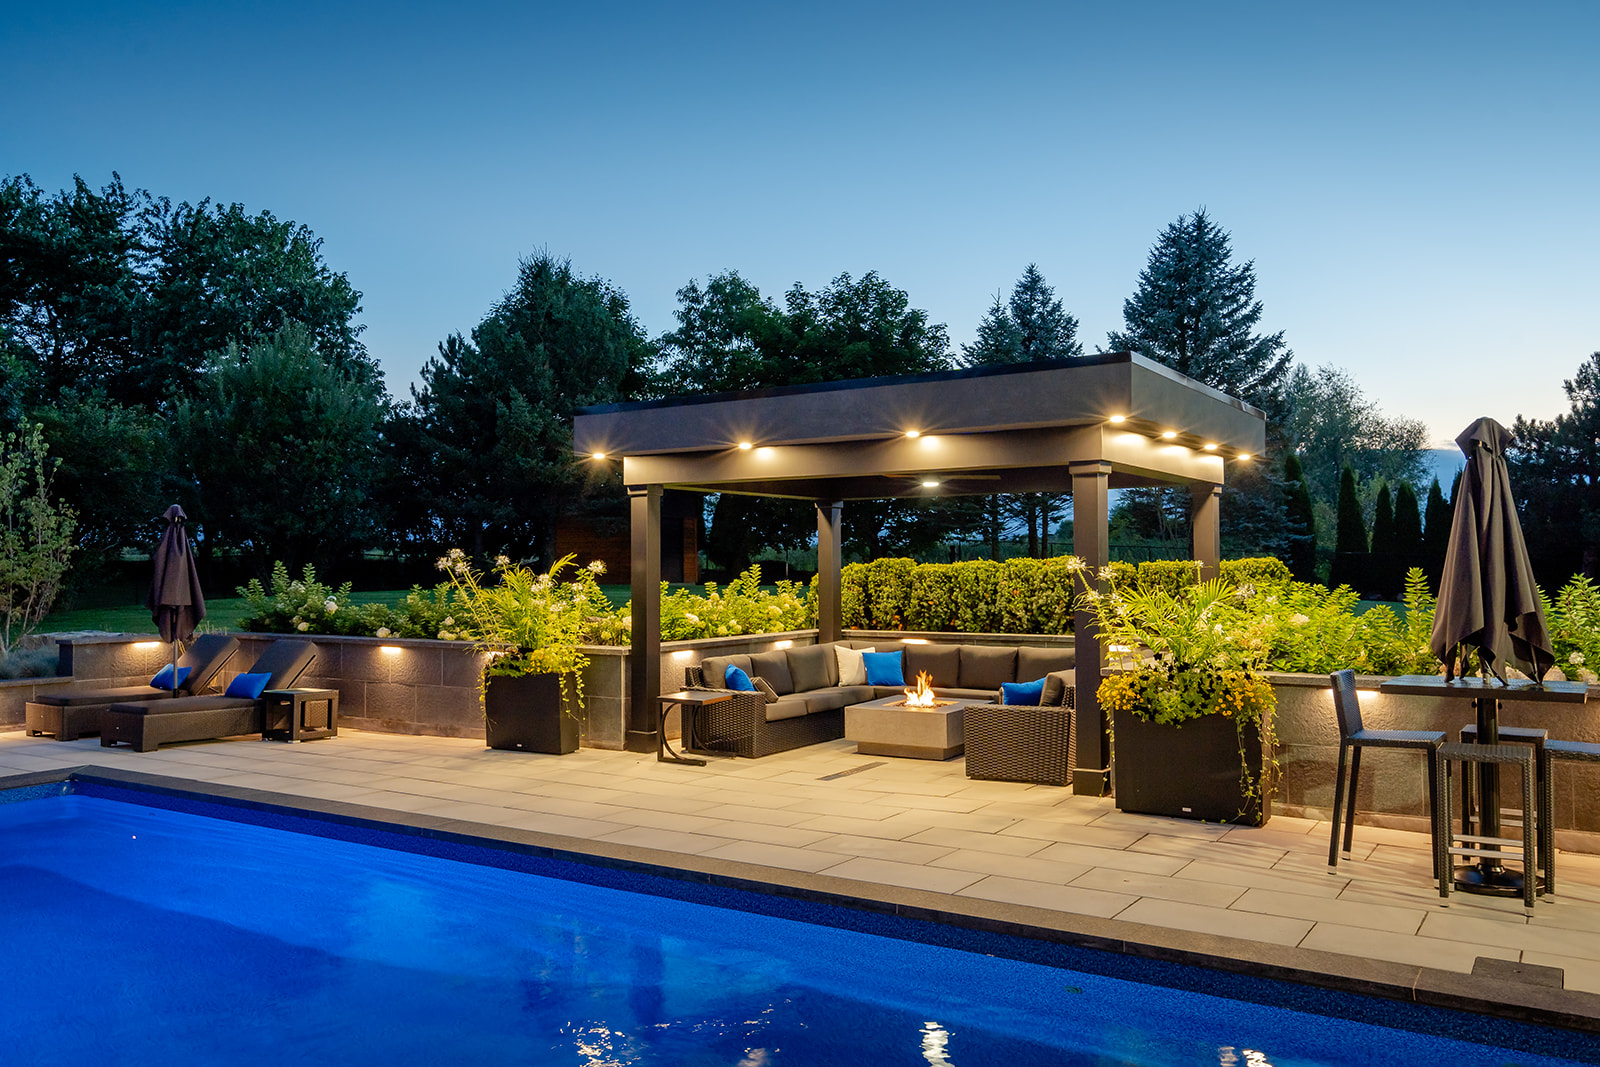 An outdoor seating area underneath a gazebo with lights turned on and the inground pool.